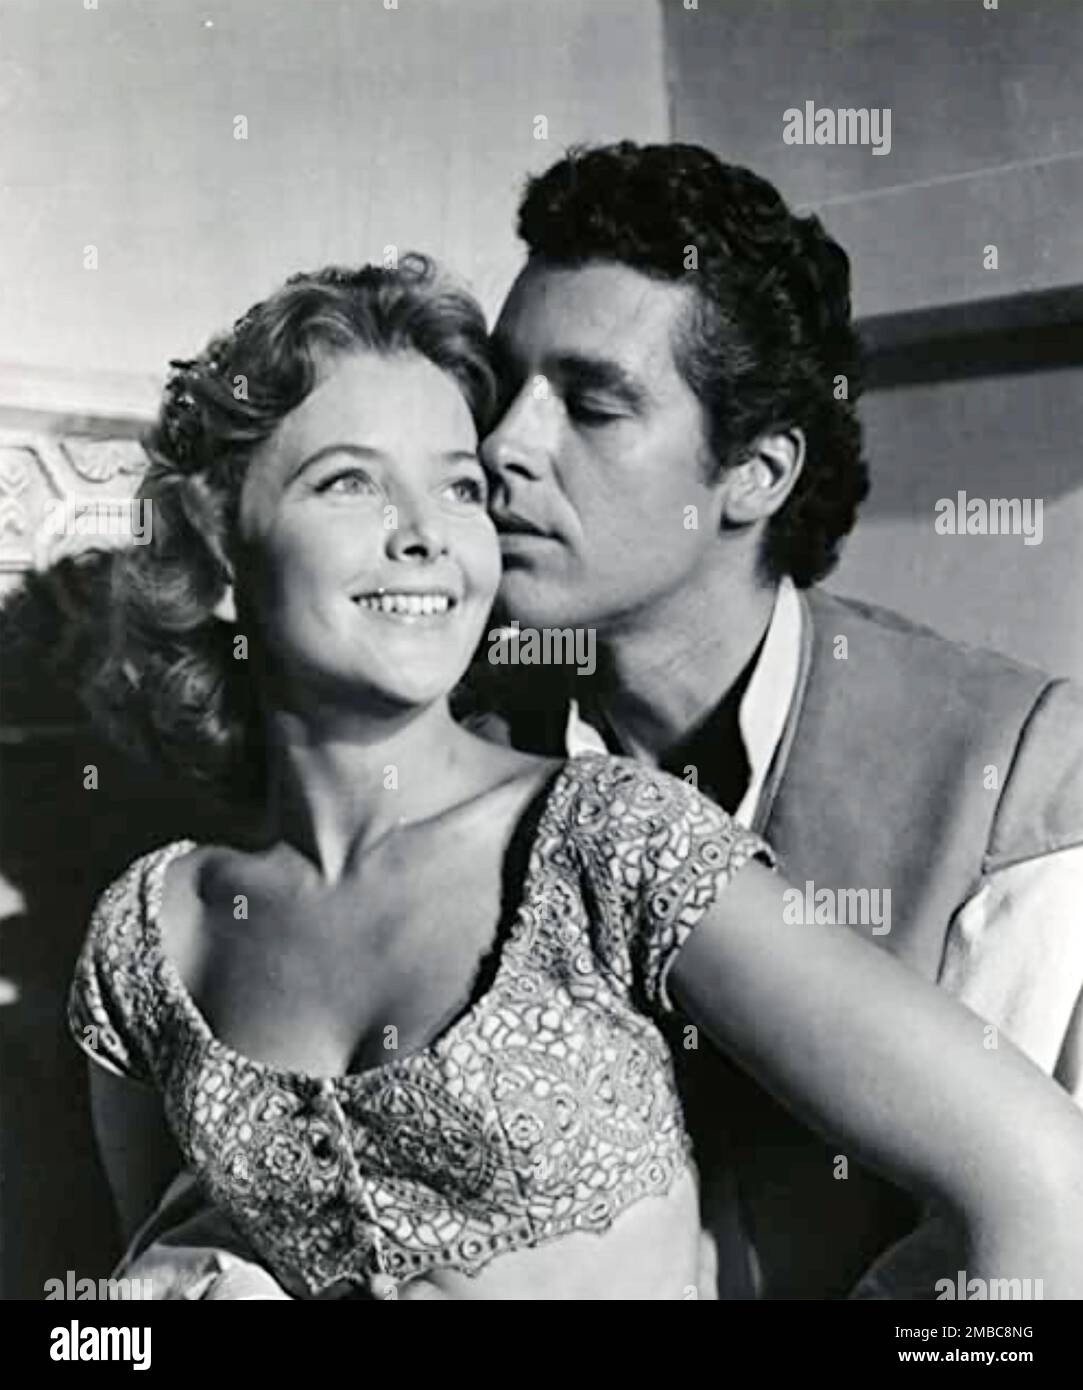 THE 2 WORLDS OF GULLIVER 1960 Columbia Pictures film with Kerwin Mathews and June Thorburn Stock Photo